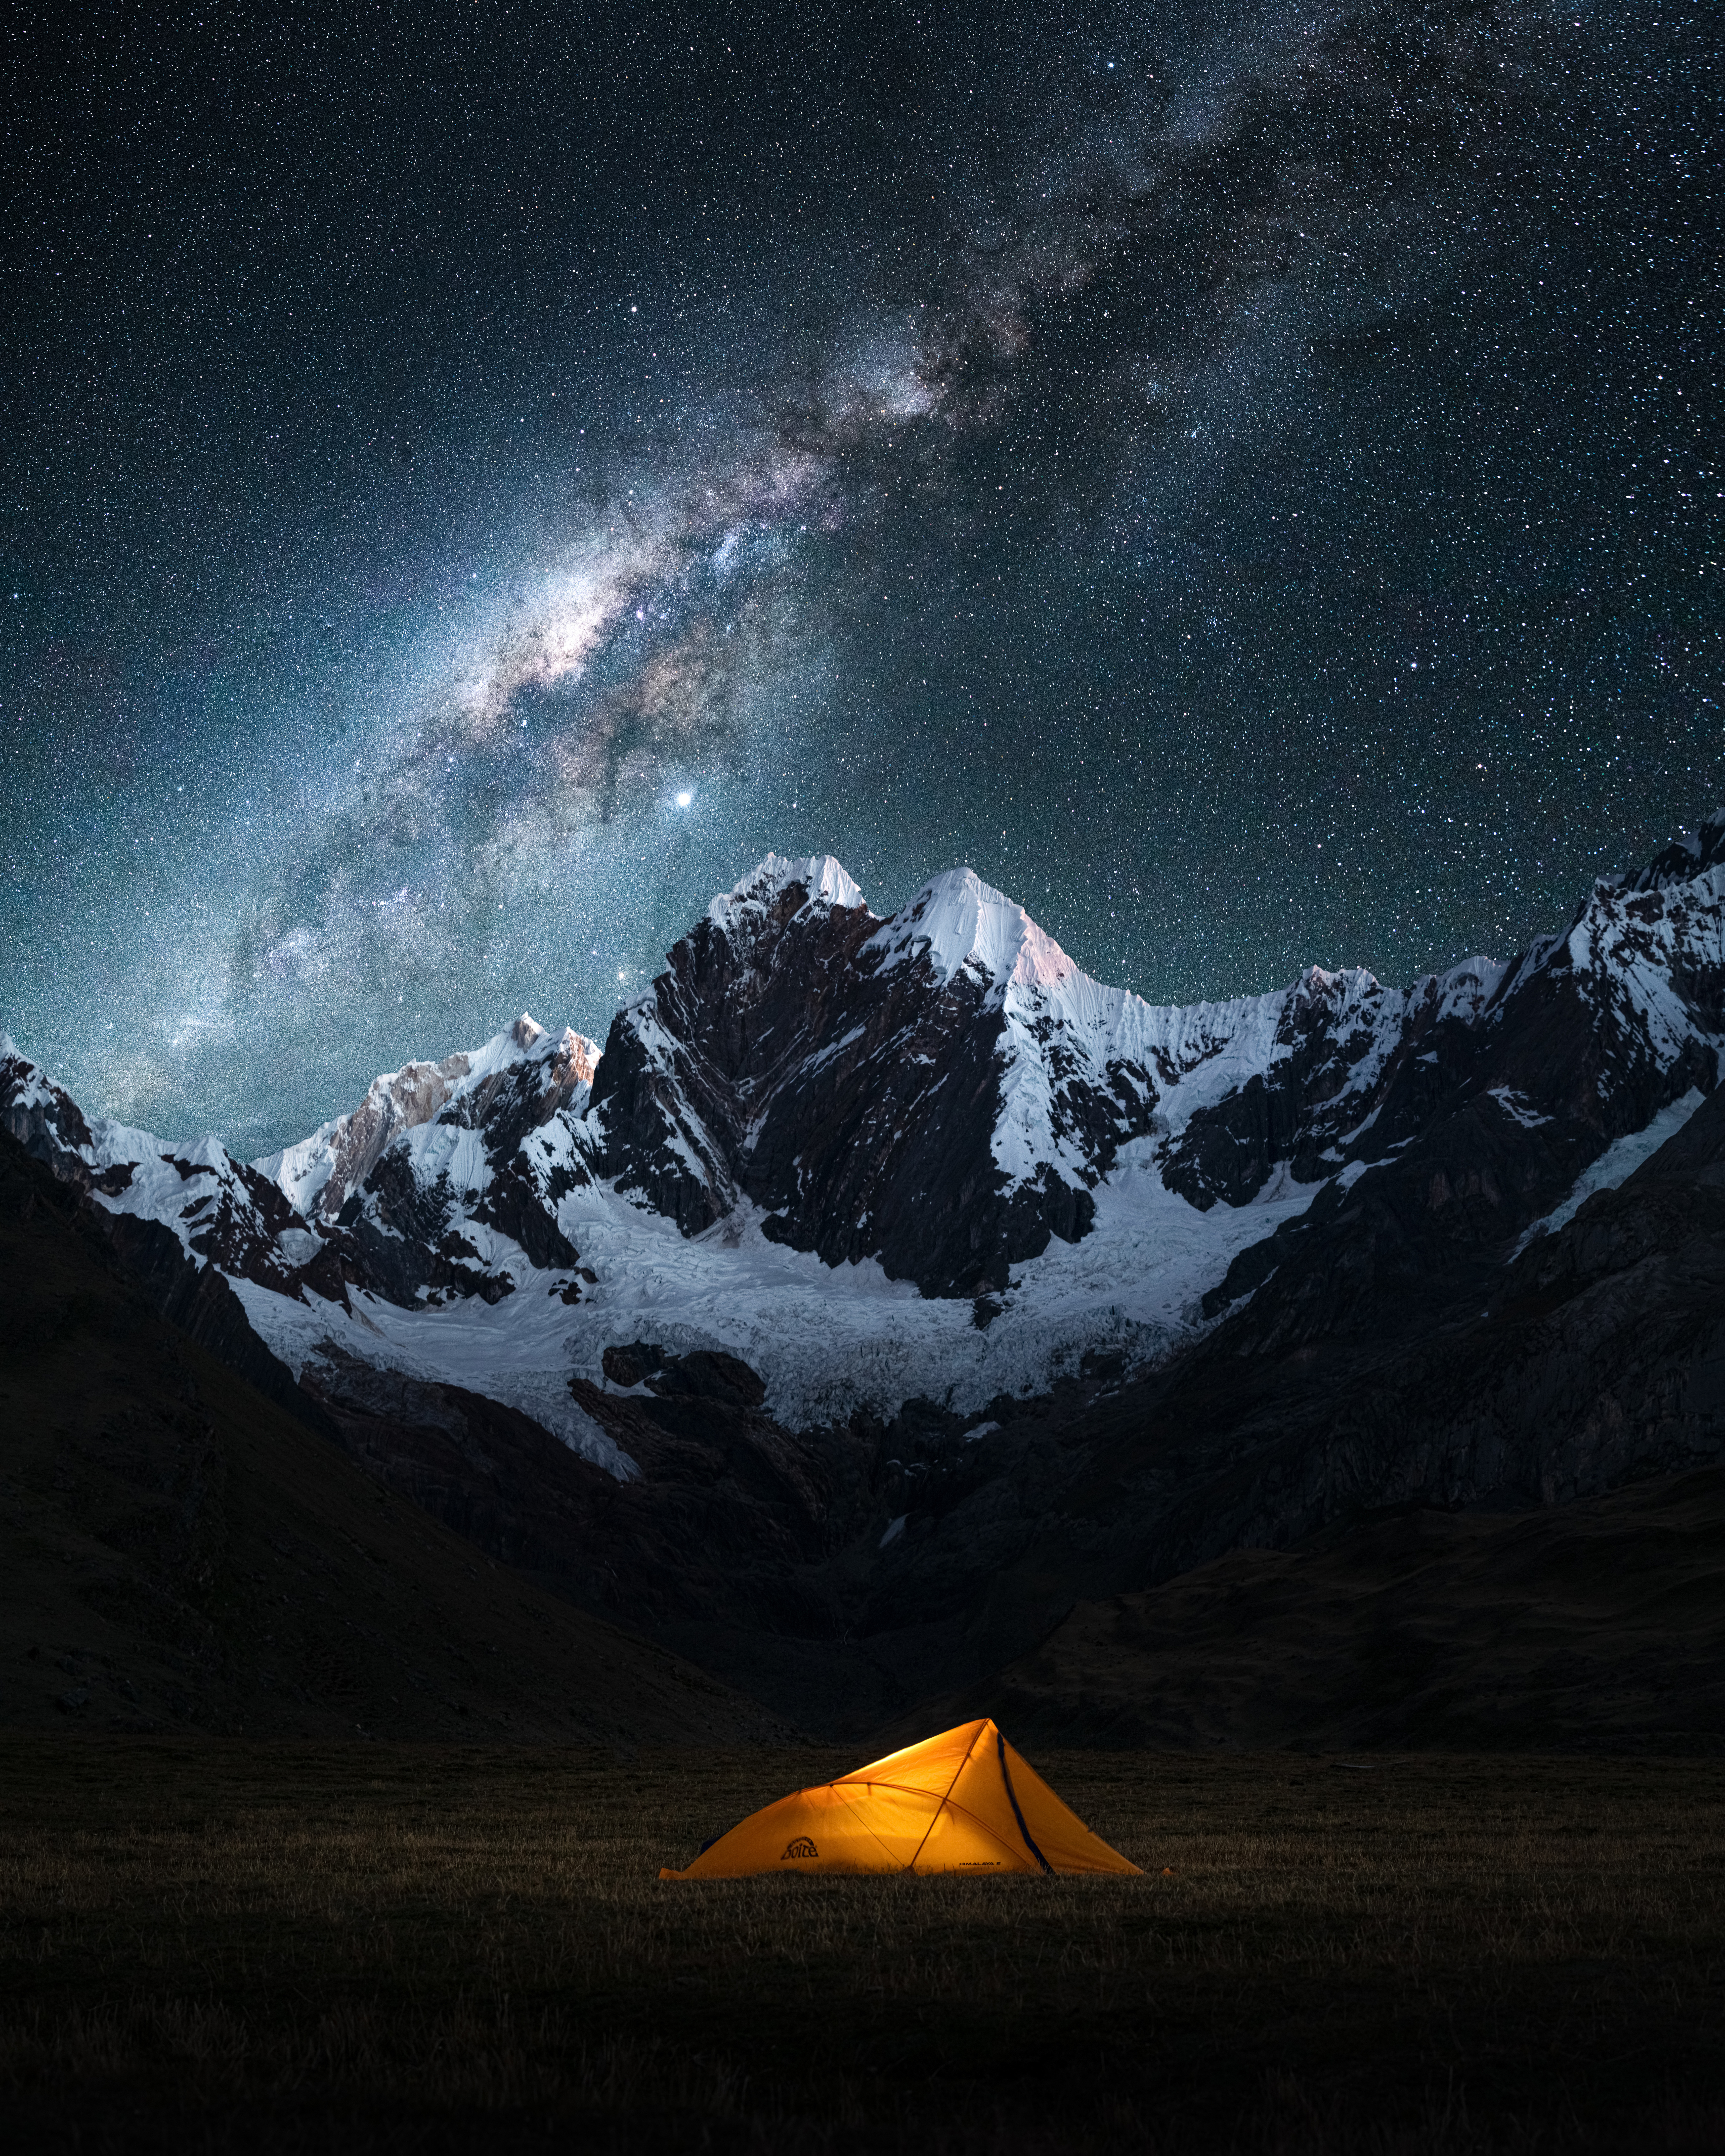 General 6860x8575 photography landscape nature mountains night nightscape snow starry night tent portrait display Peru stars